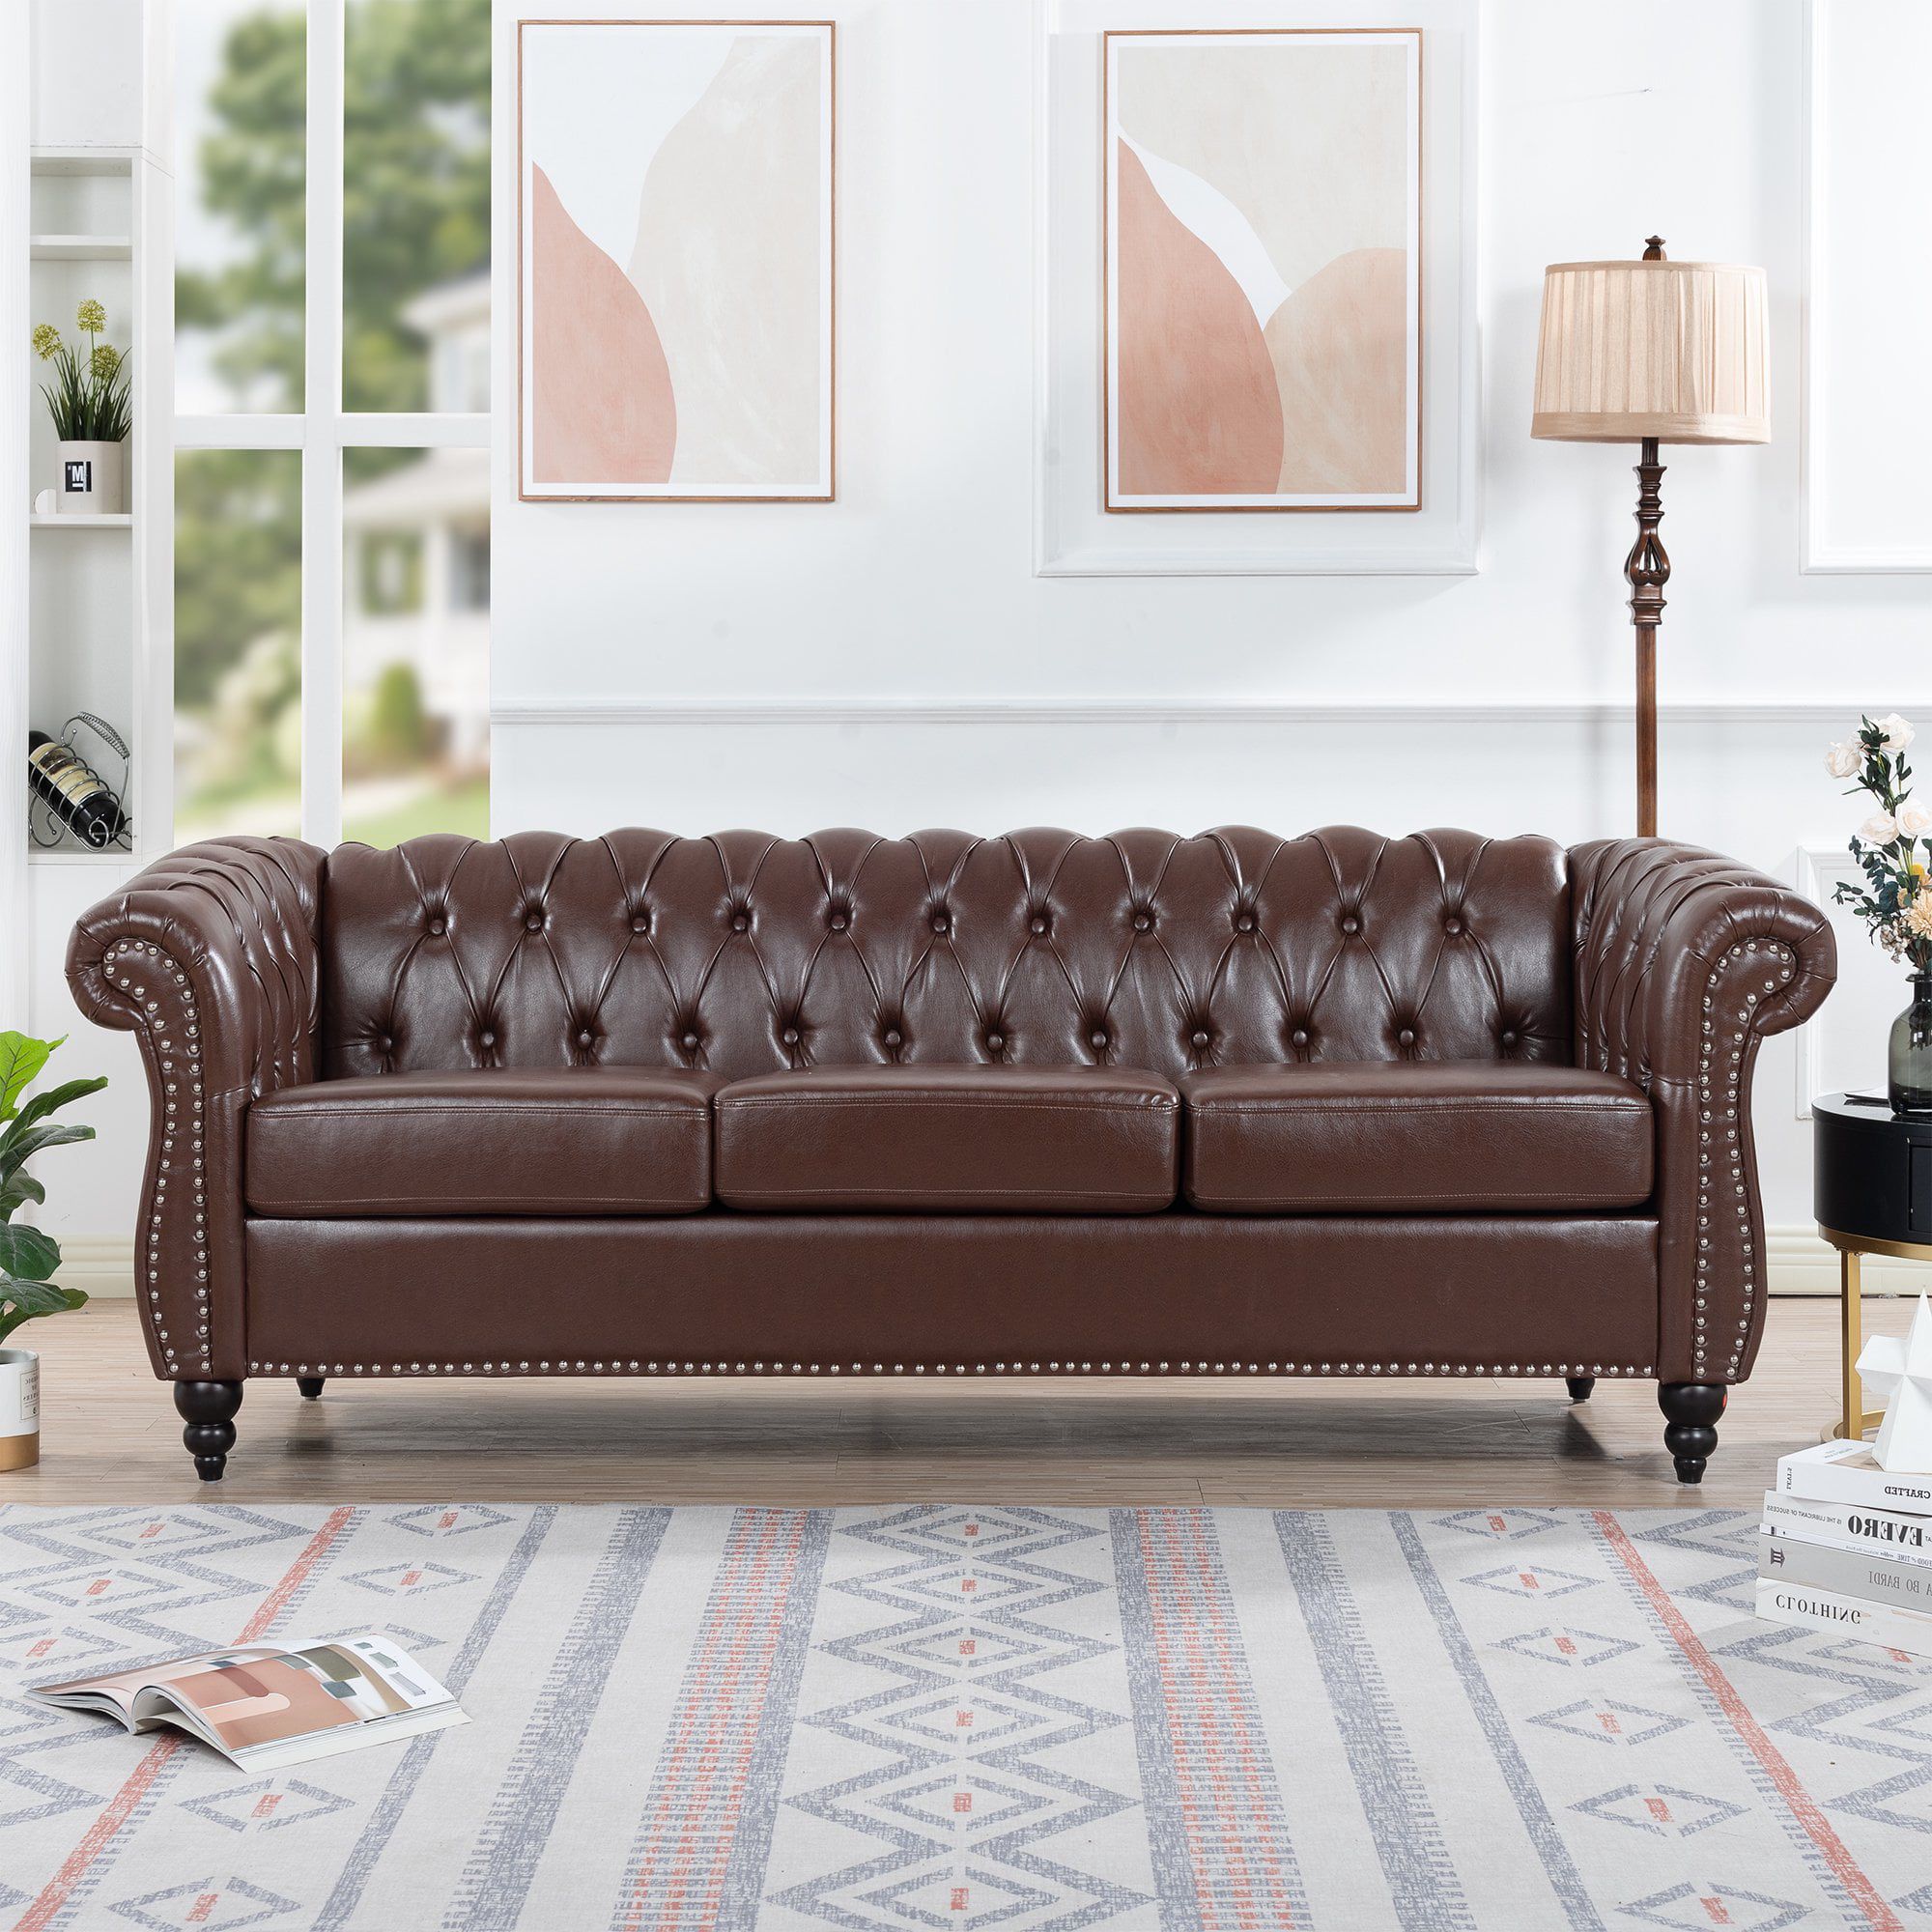 84" Pu Leather Chesterfield Sofas For Living Room, Rolled Arm 3 Seater  Large Couch Deep Button Nailhead Tufted Upholstered Couches For Bedroom,  Office Apartment – Dark Brown – Walmart For Sofas With Rolled Arm (View 15 of 20)